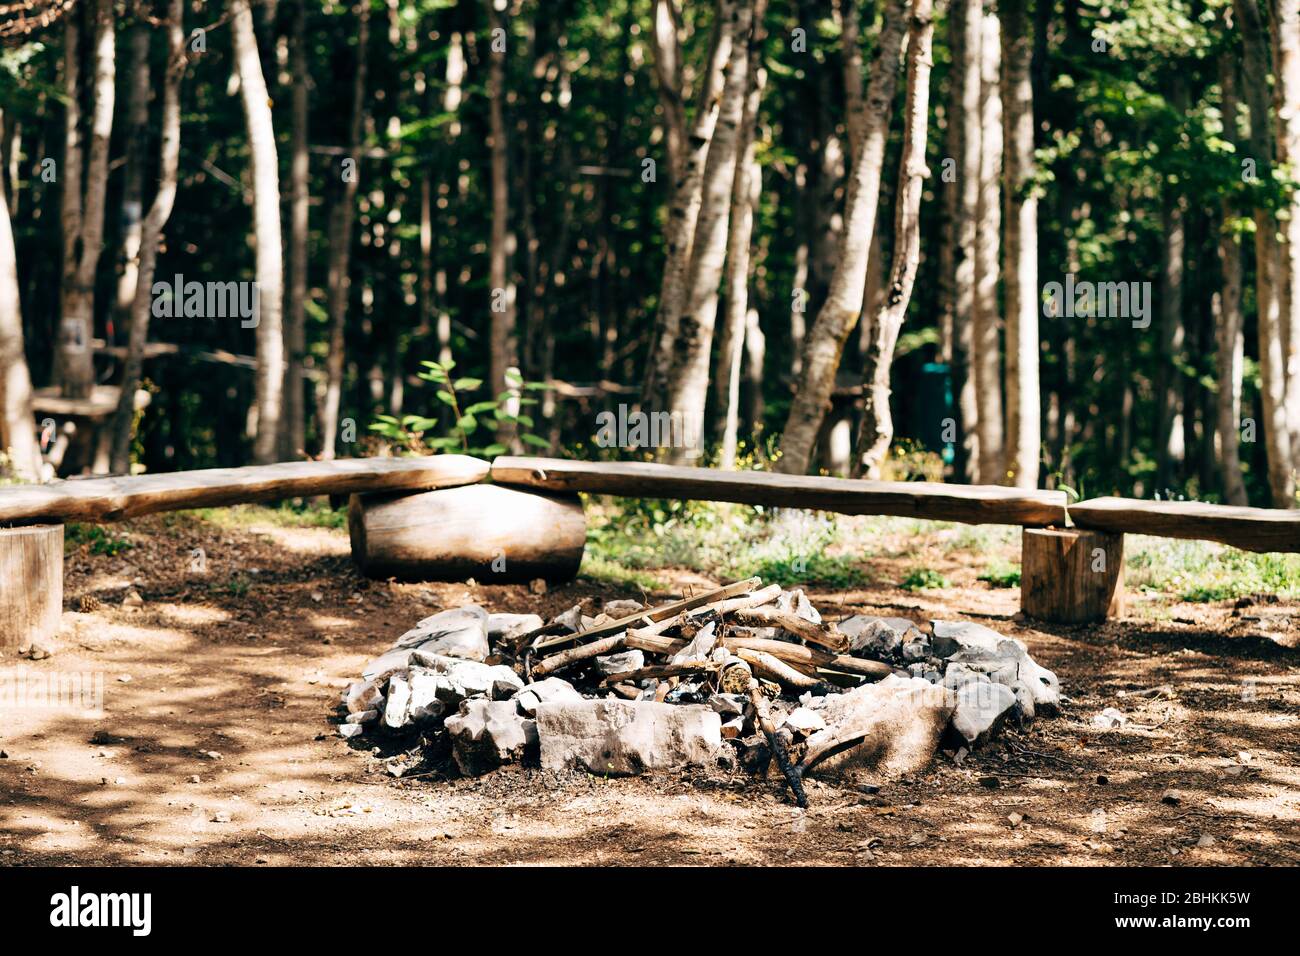 A bonfire in the woods. A place to make a campfire on the ground in the woods. A safe area for starting fire, with benches and mown grass. Stock Photo